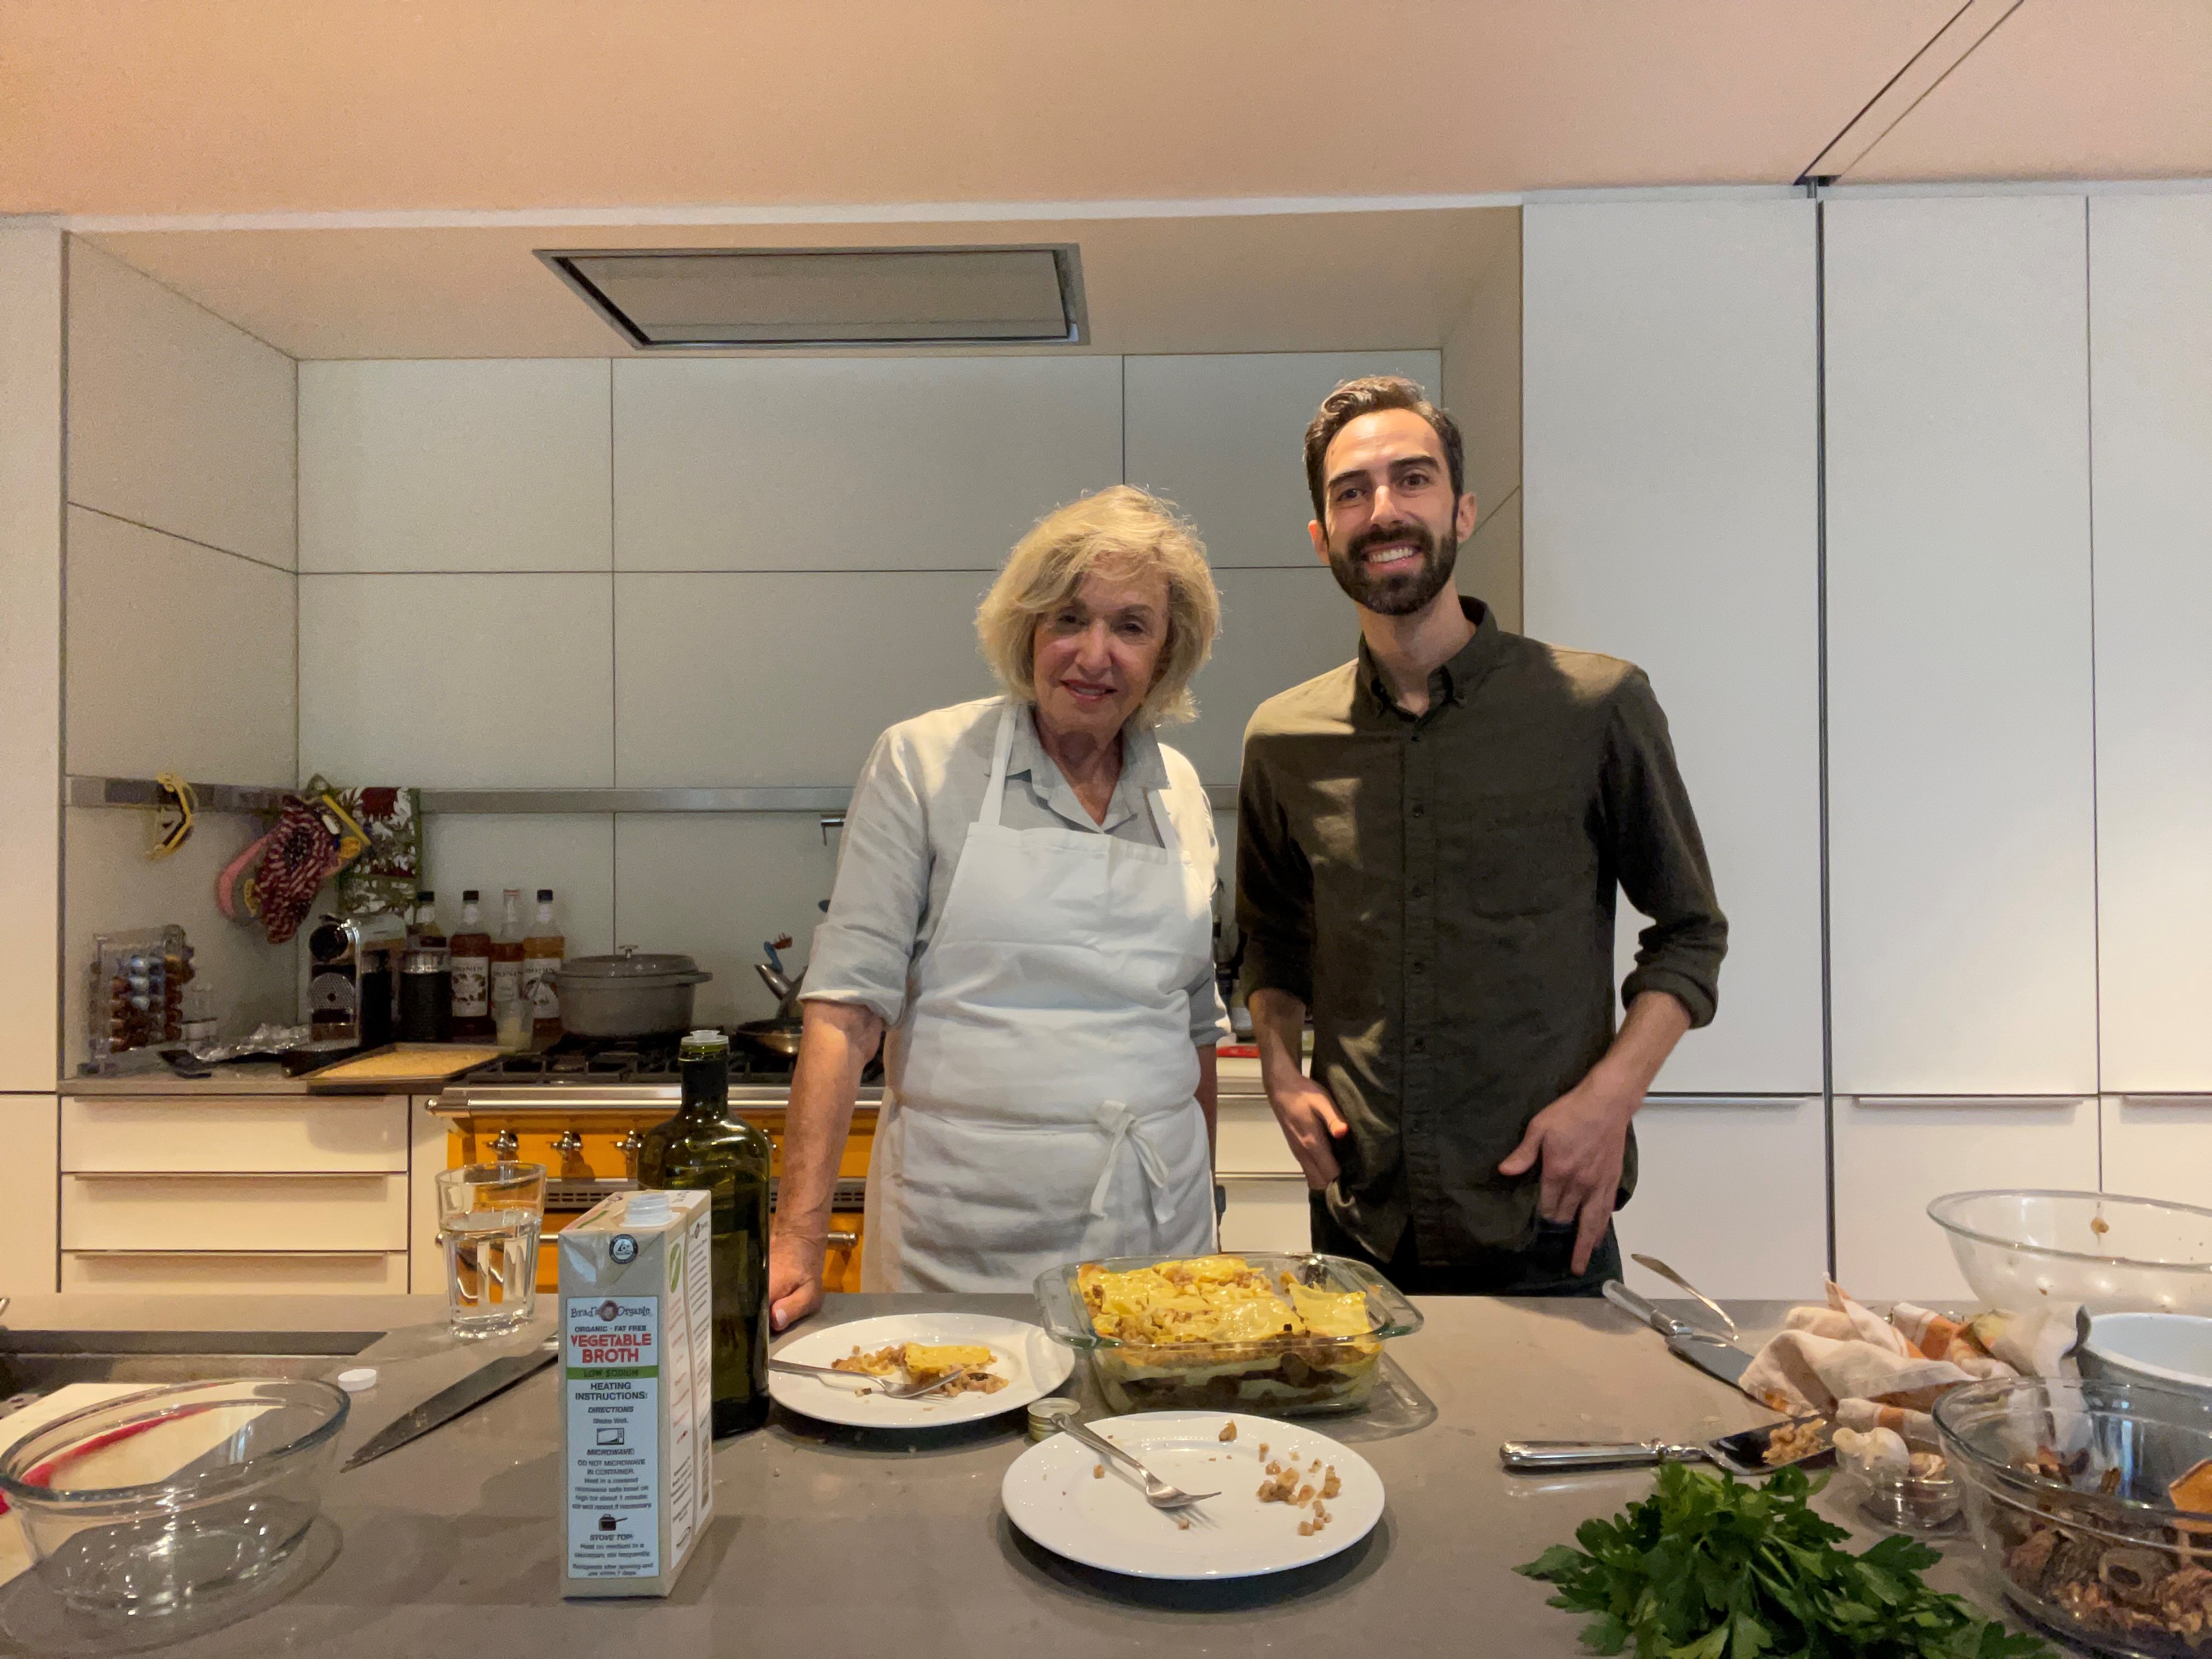 Irene and Jefrrey in a bright kitchen. Irene is blonde, older lady. Jeffrey is a young man with beard.